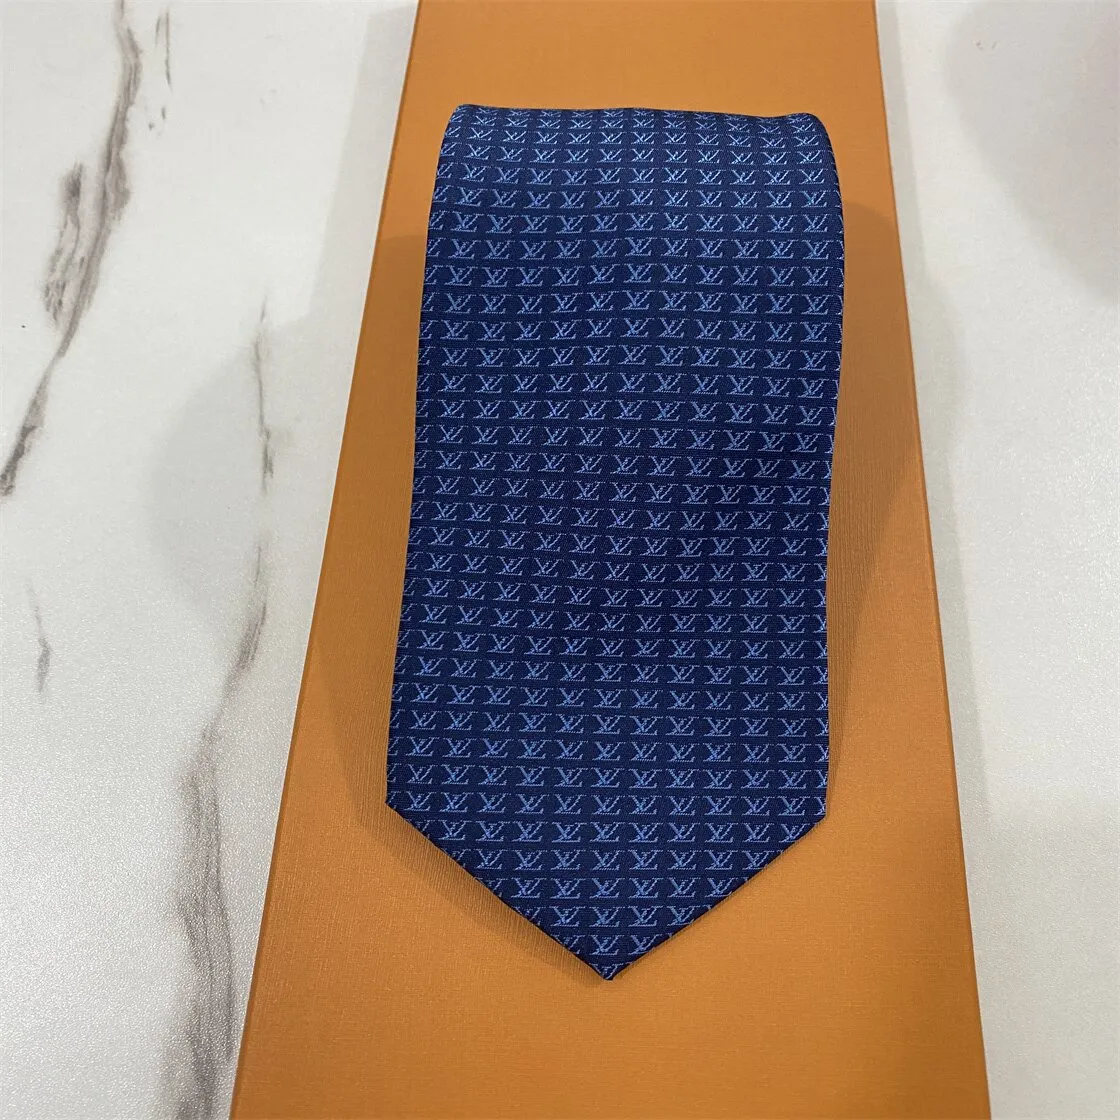 New High Quality Neck Ties Designer Silk Necktie black blue Jacquard Hand Woven for Men Wedding Casual and Business Necktie Fashion Neck Ties Box 12367